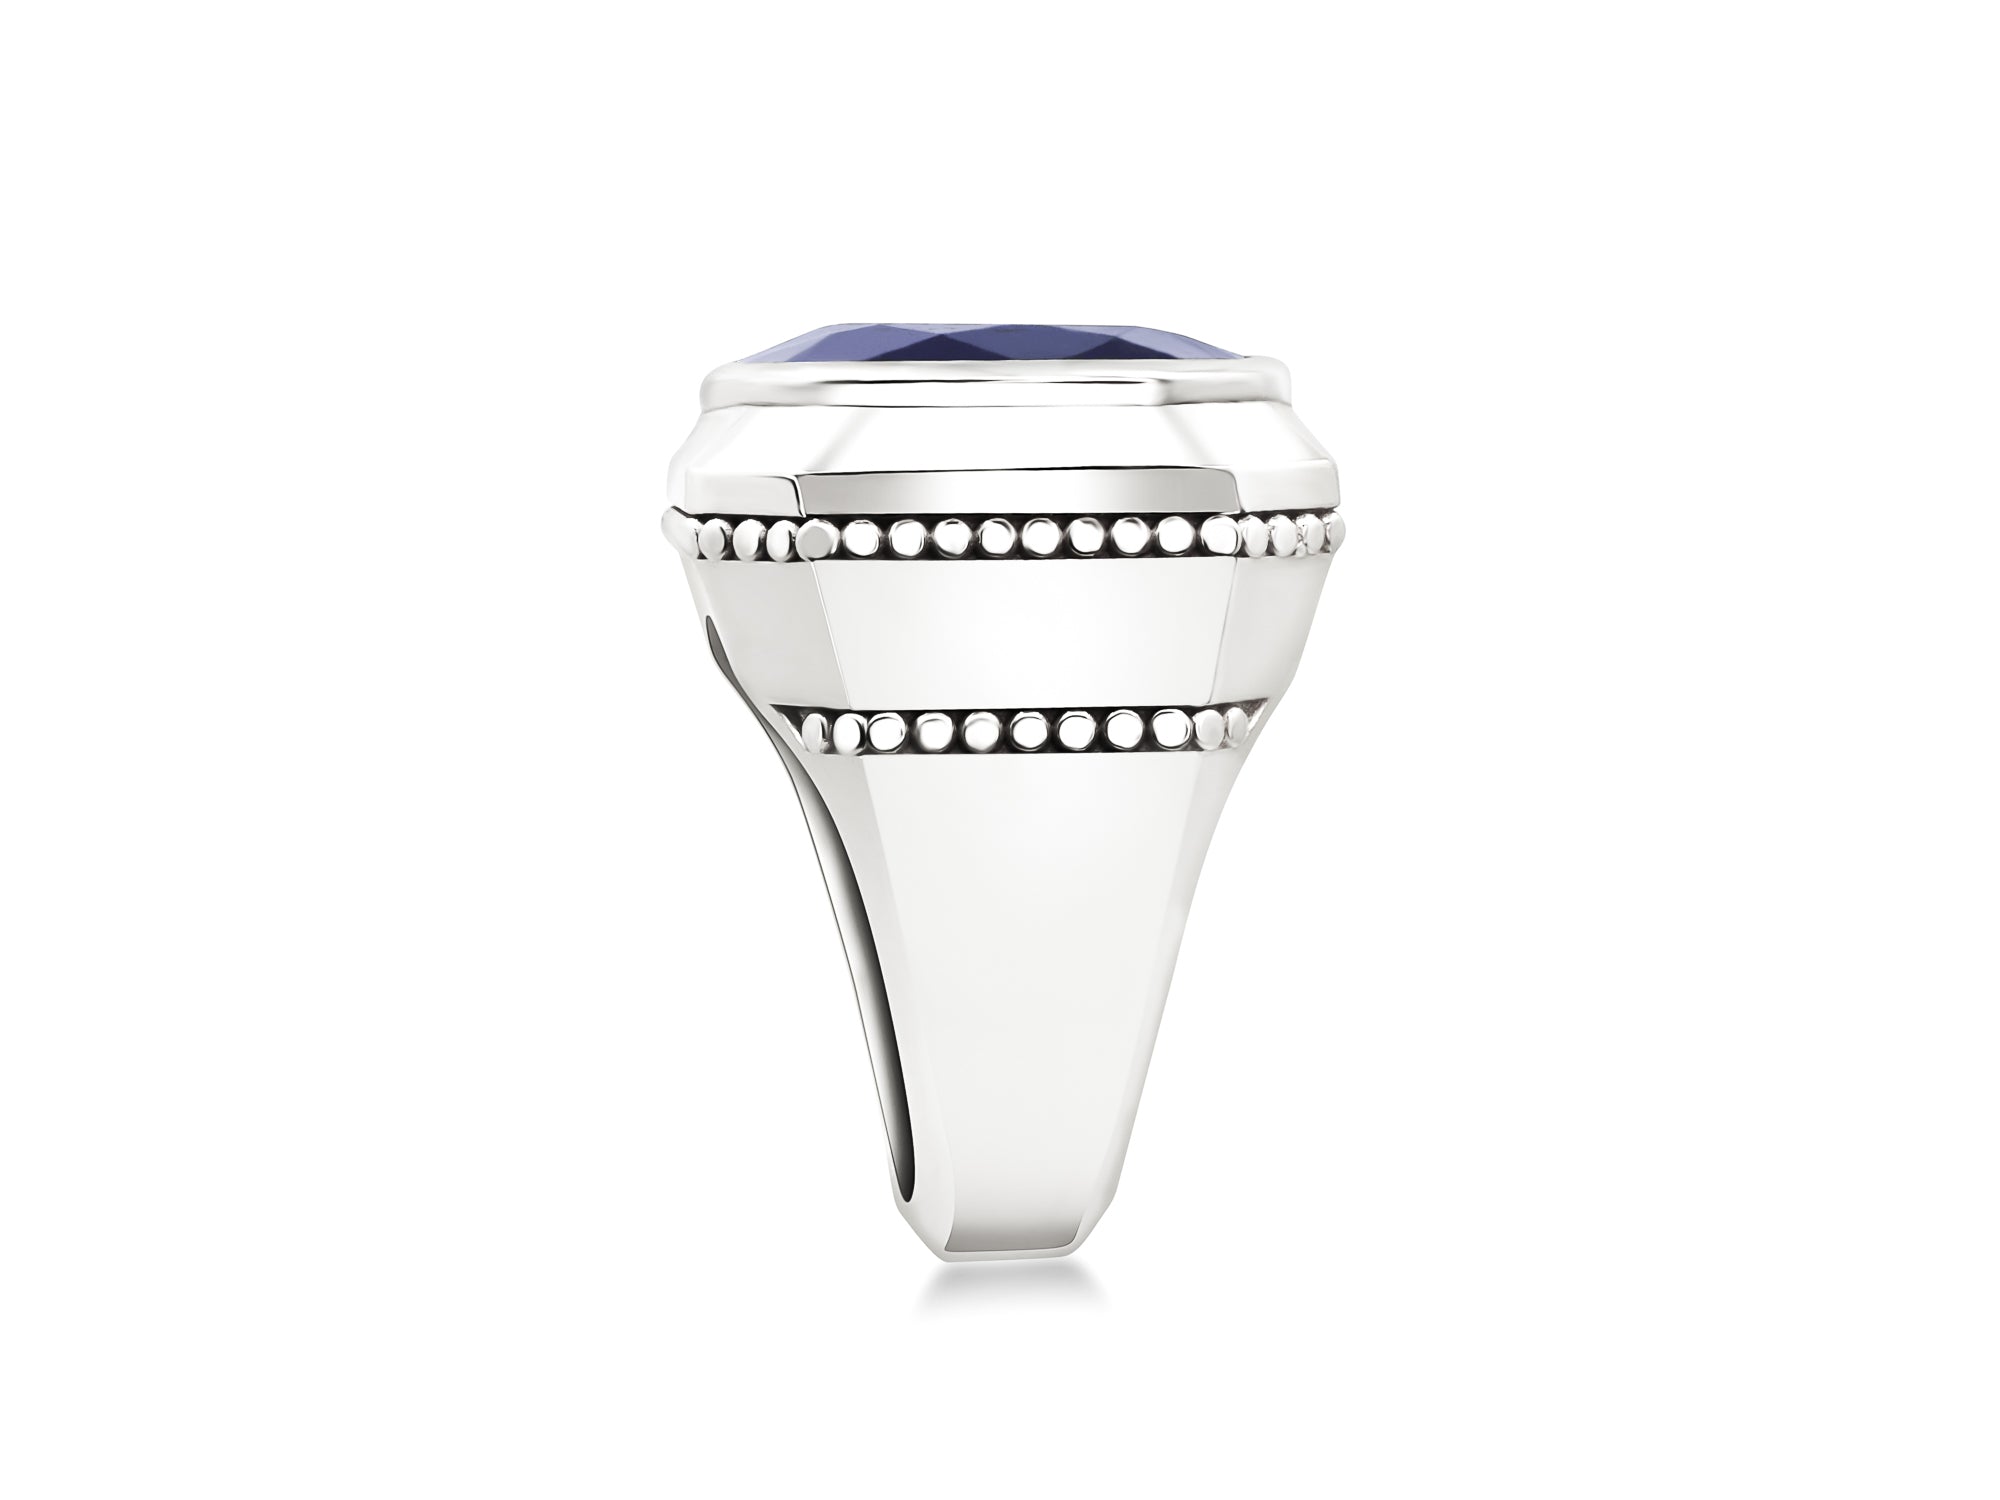 Sapphire and Silver Ring